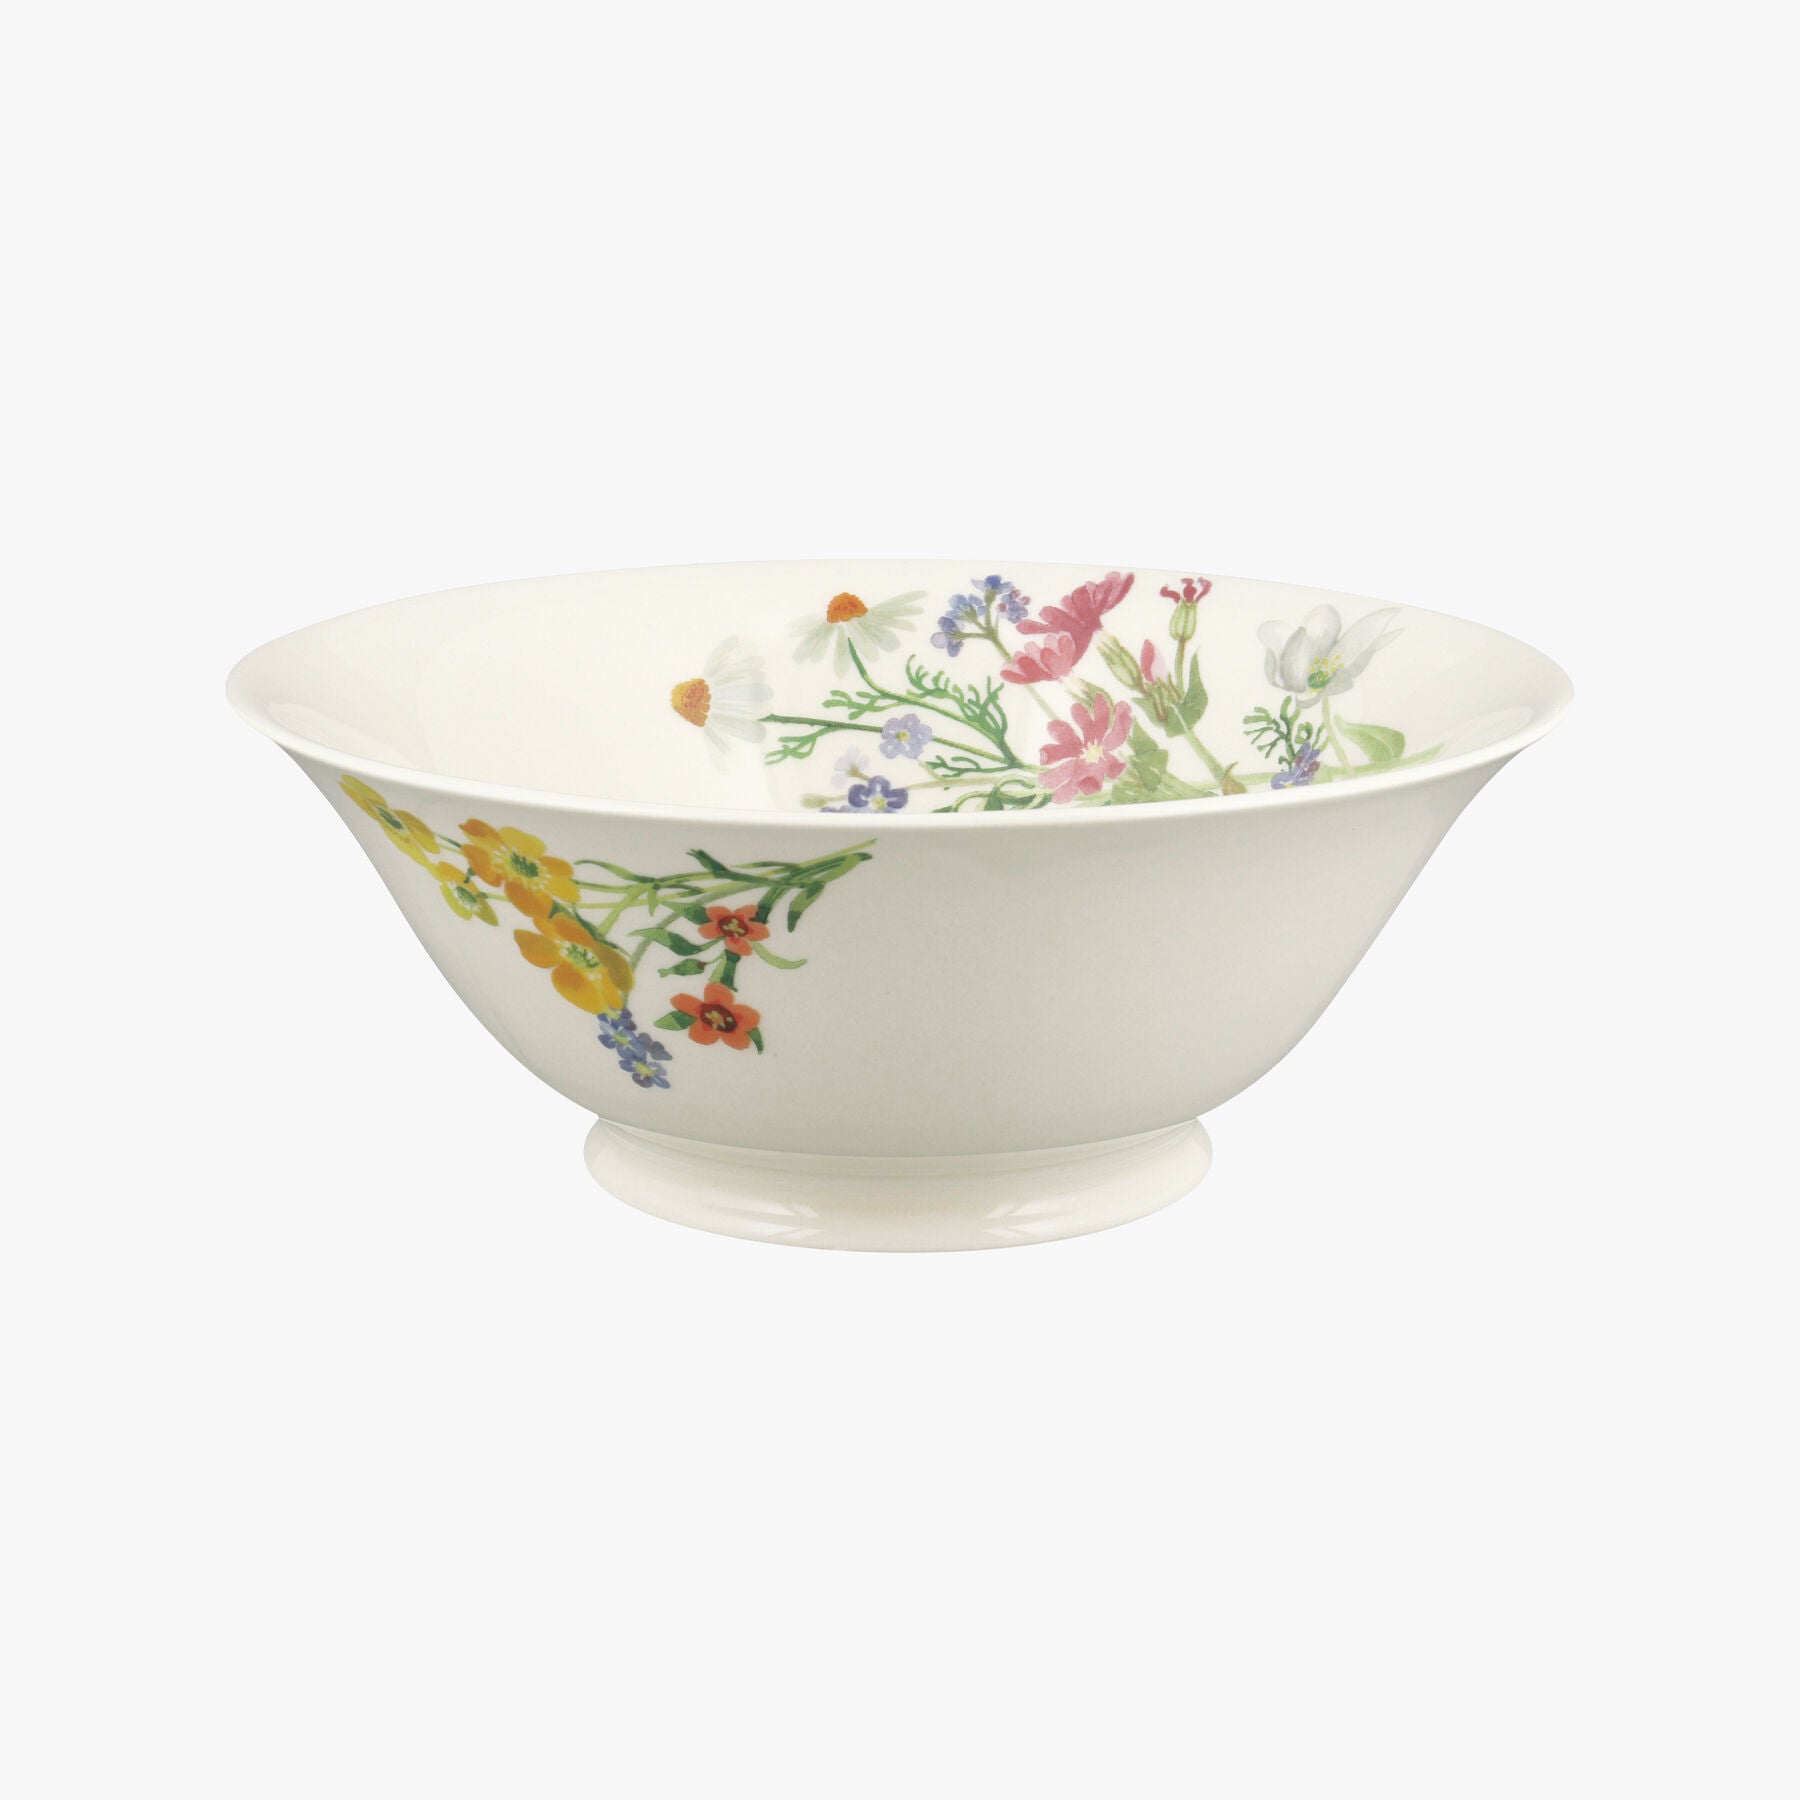 Wild Flowers Small Serving Bowl - Unique Handmade & Handpainted English Earthenware Decorative Plate